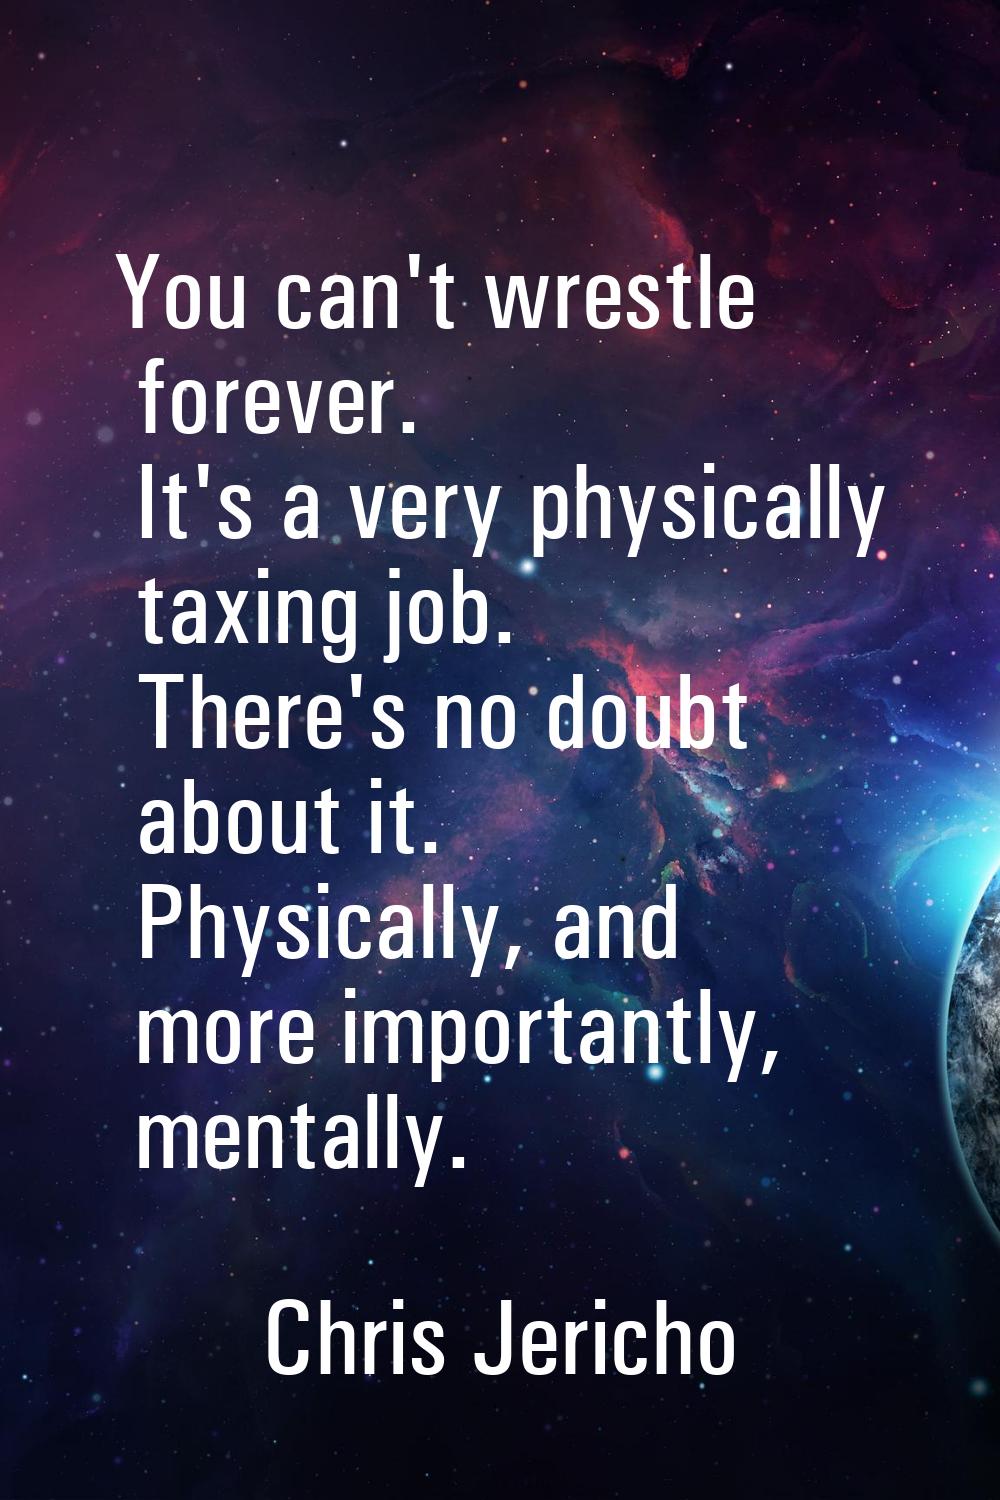 You can't wrestle forever. It's a very physically taxing job. There's no doubt about it. Physically